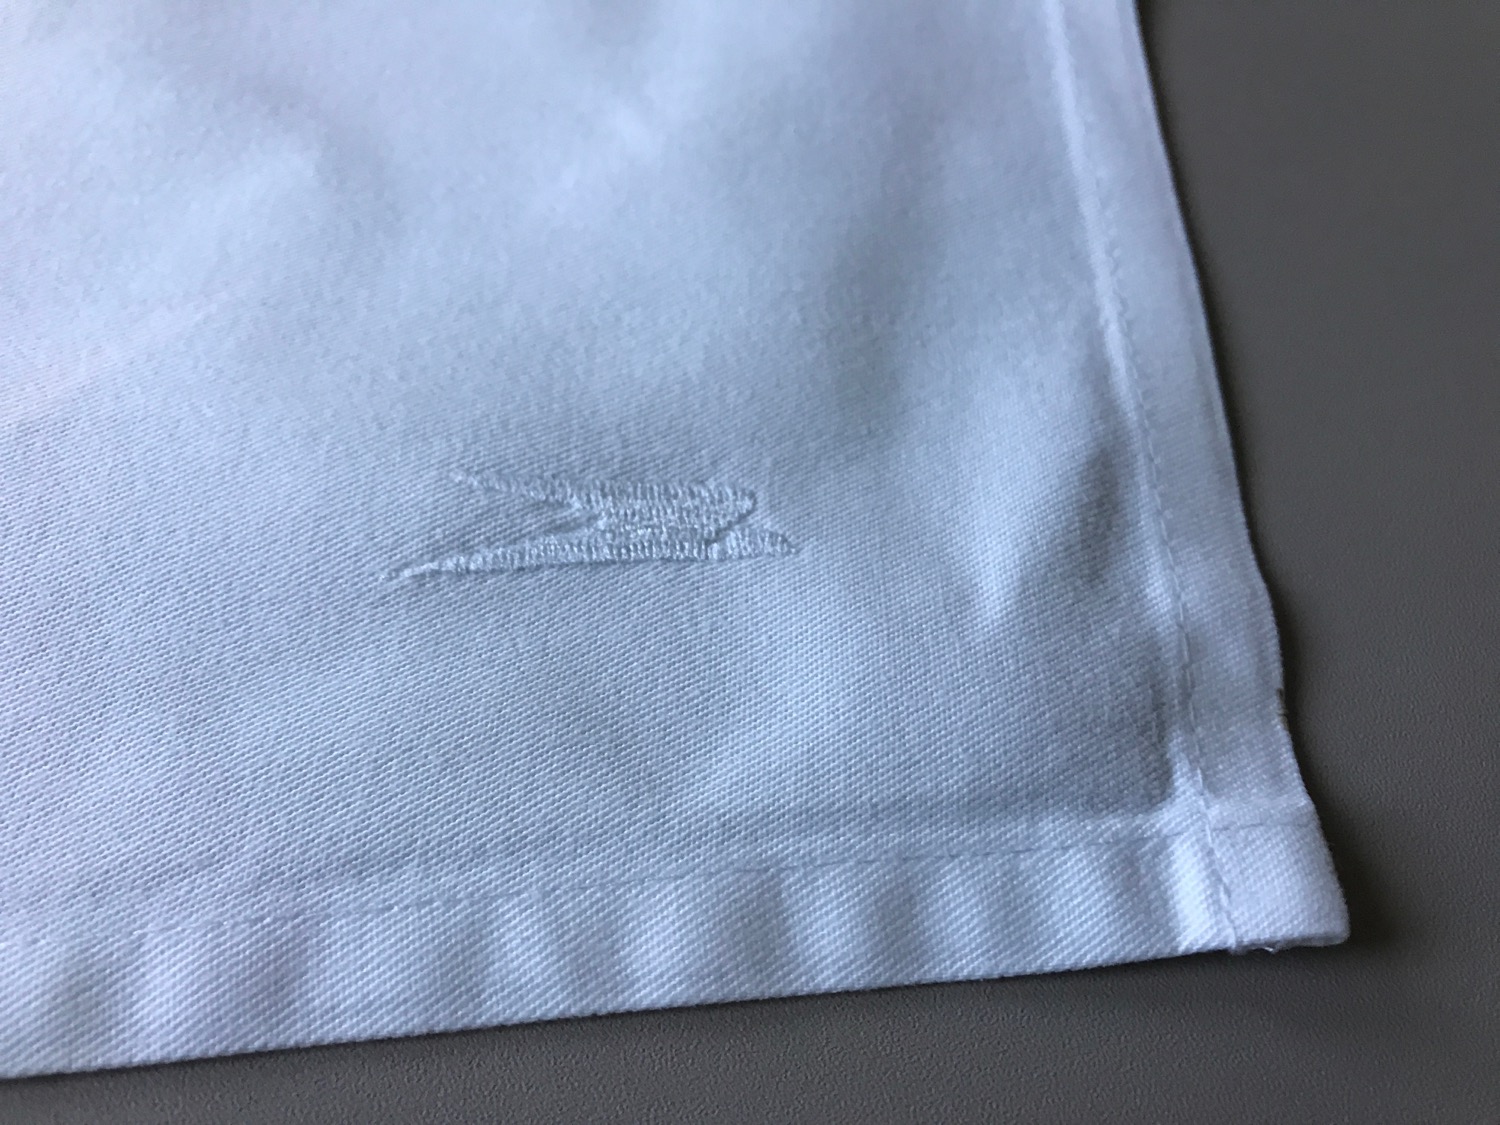 a white cloth with a logo on it